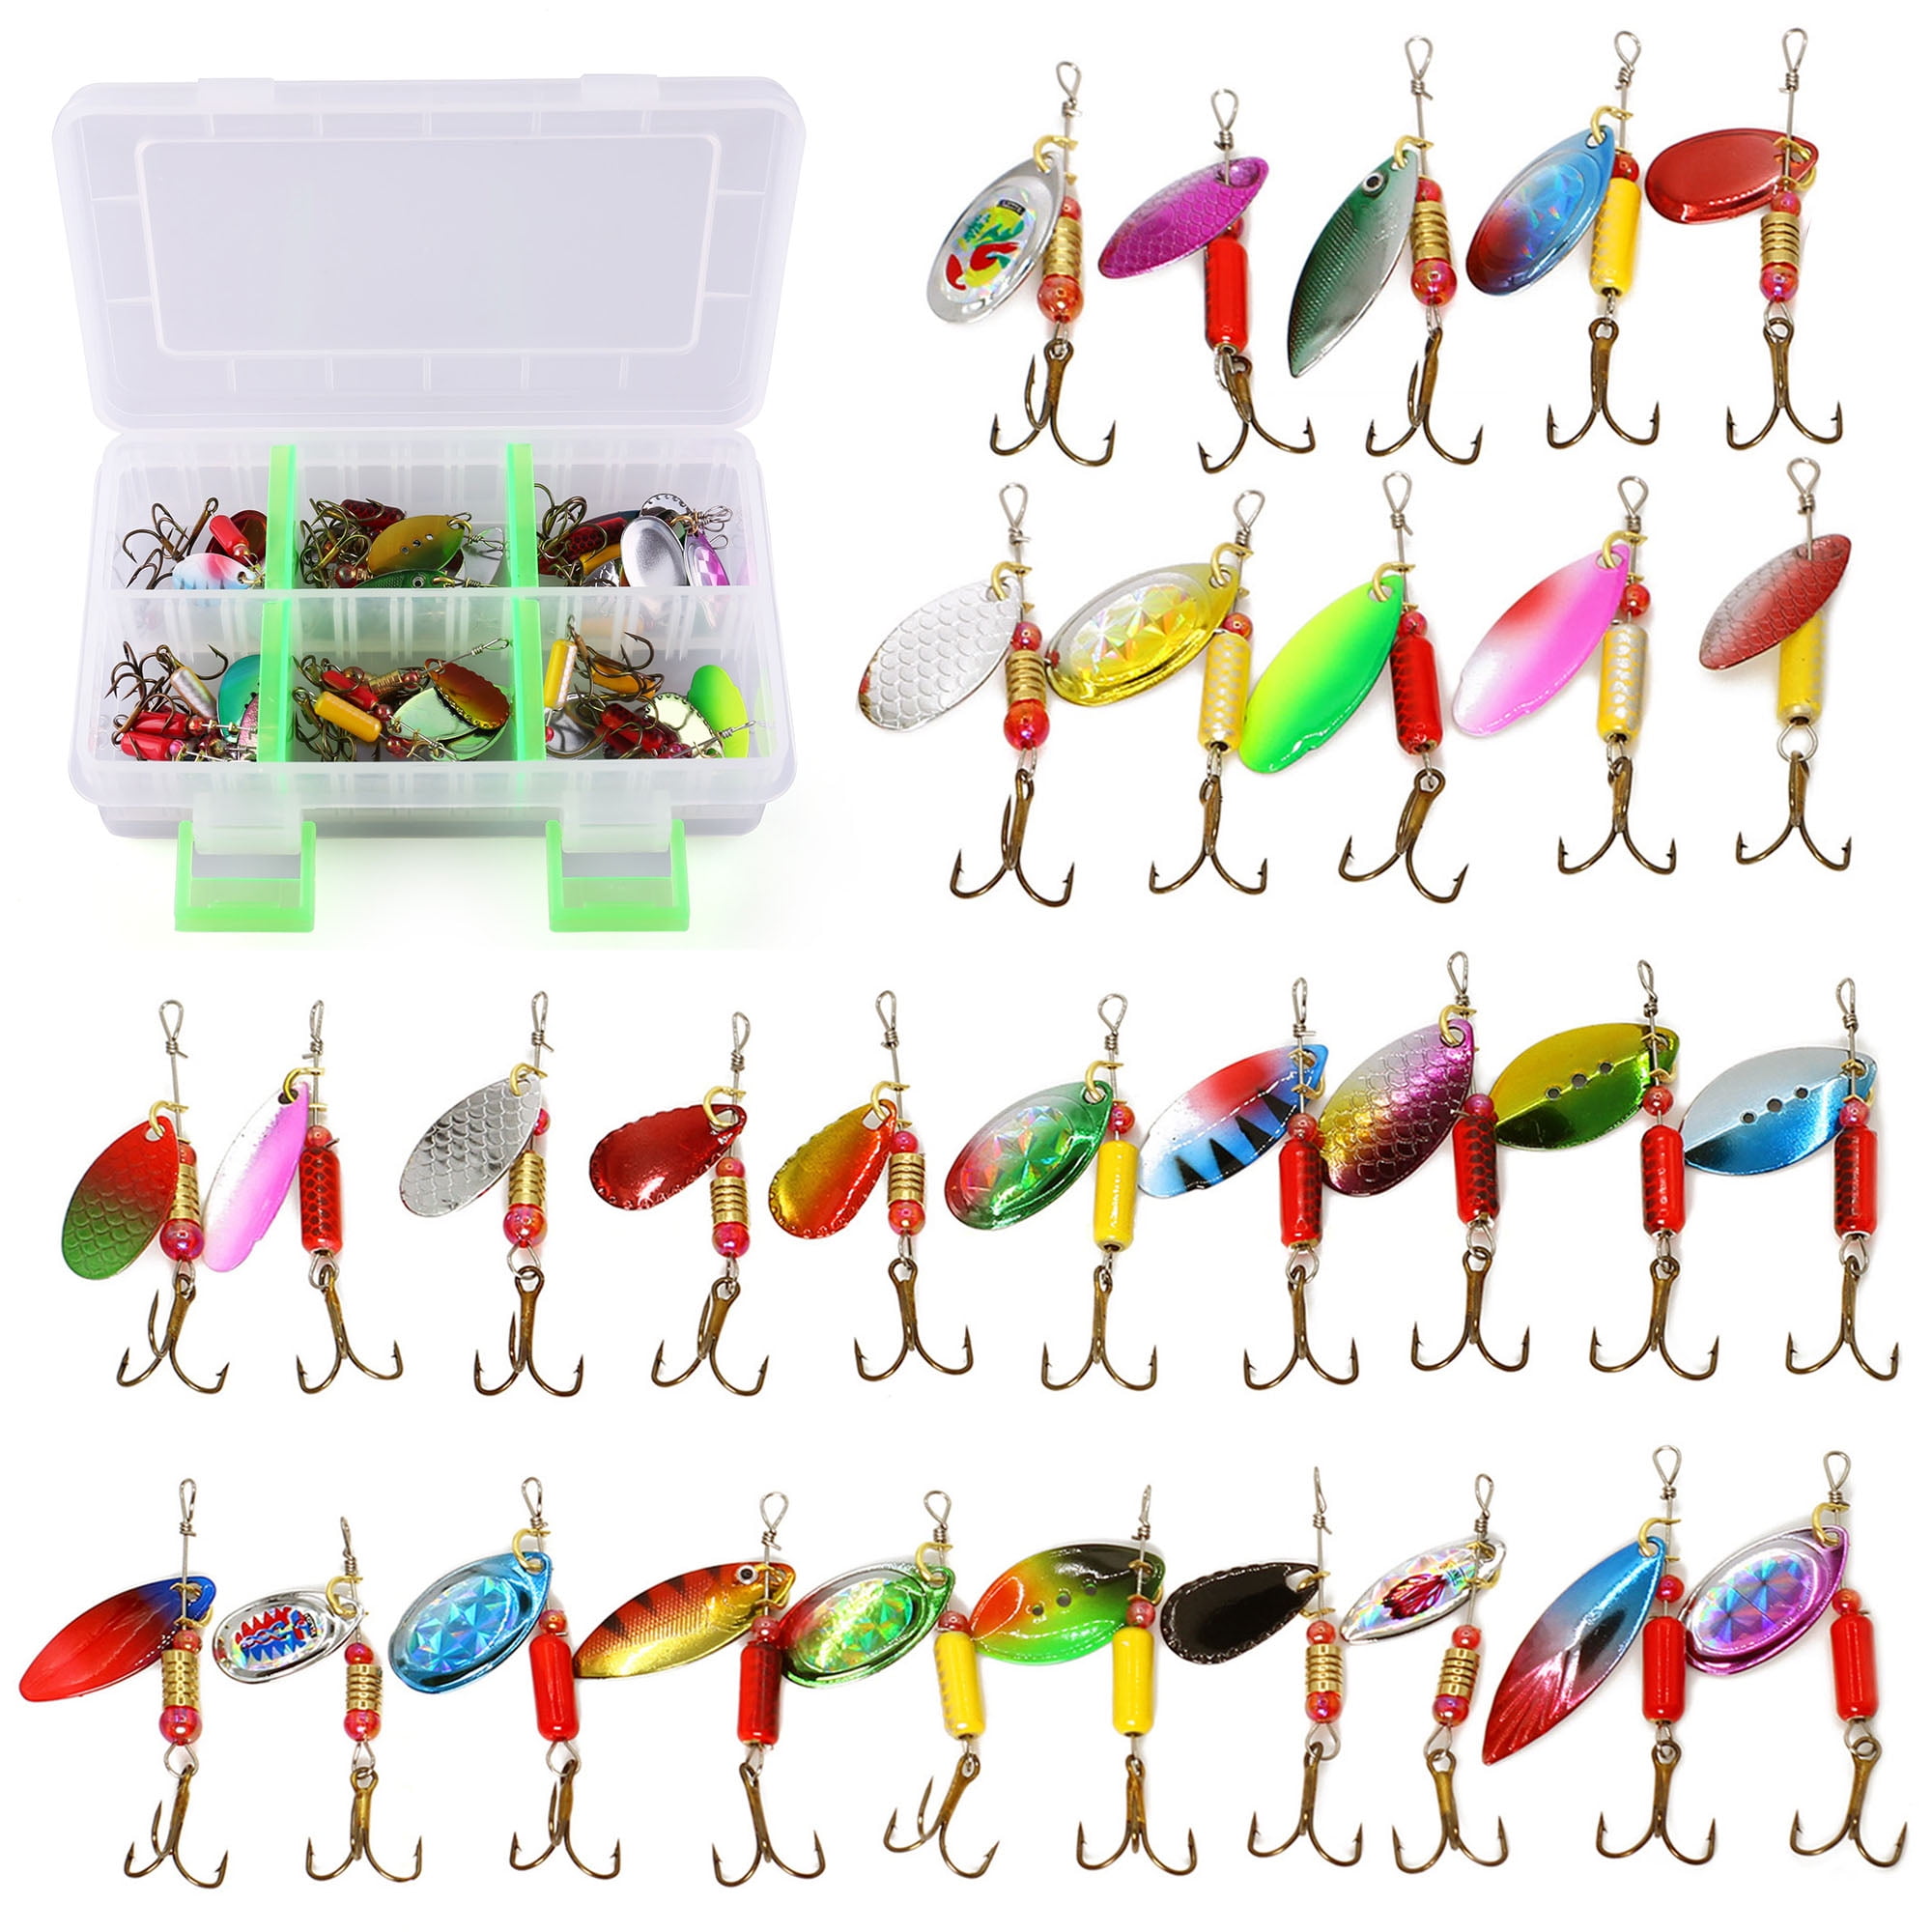 Danielson Trout Kit with Lures and Tackle, 68 Pieces - Walmart.com